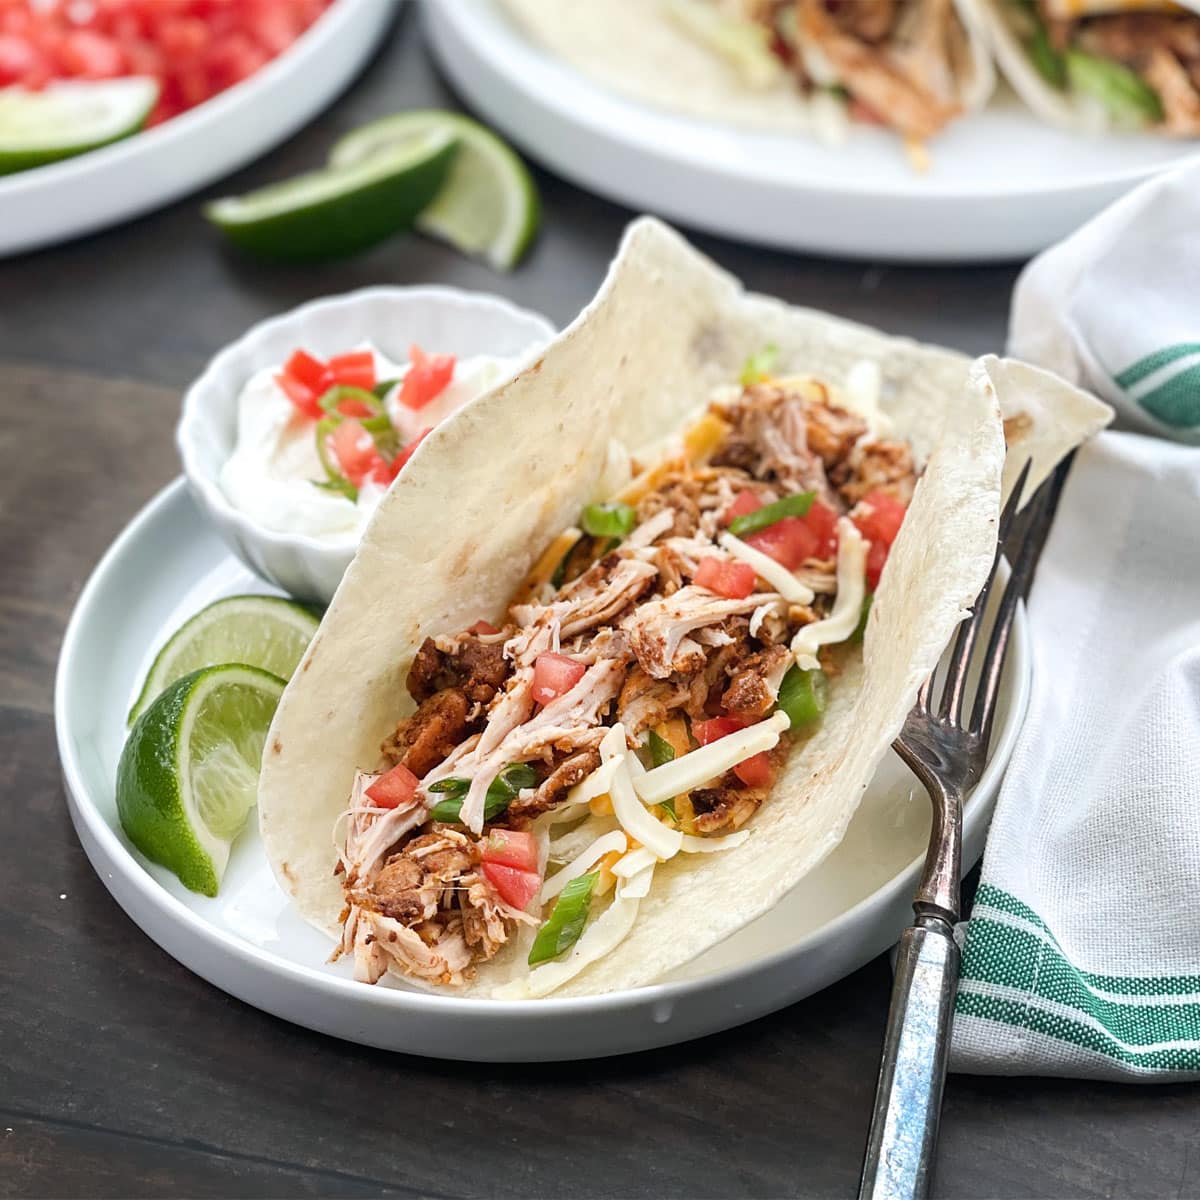 Soft shell tacos with shredded chicken filling.